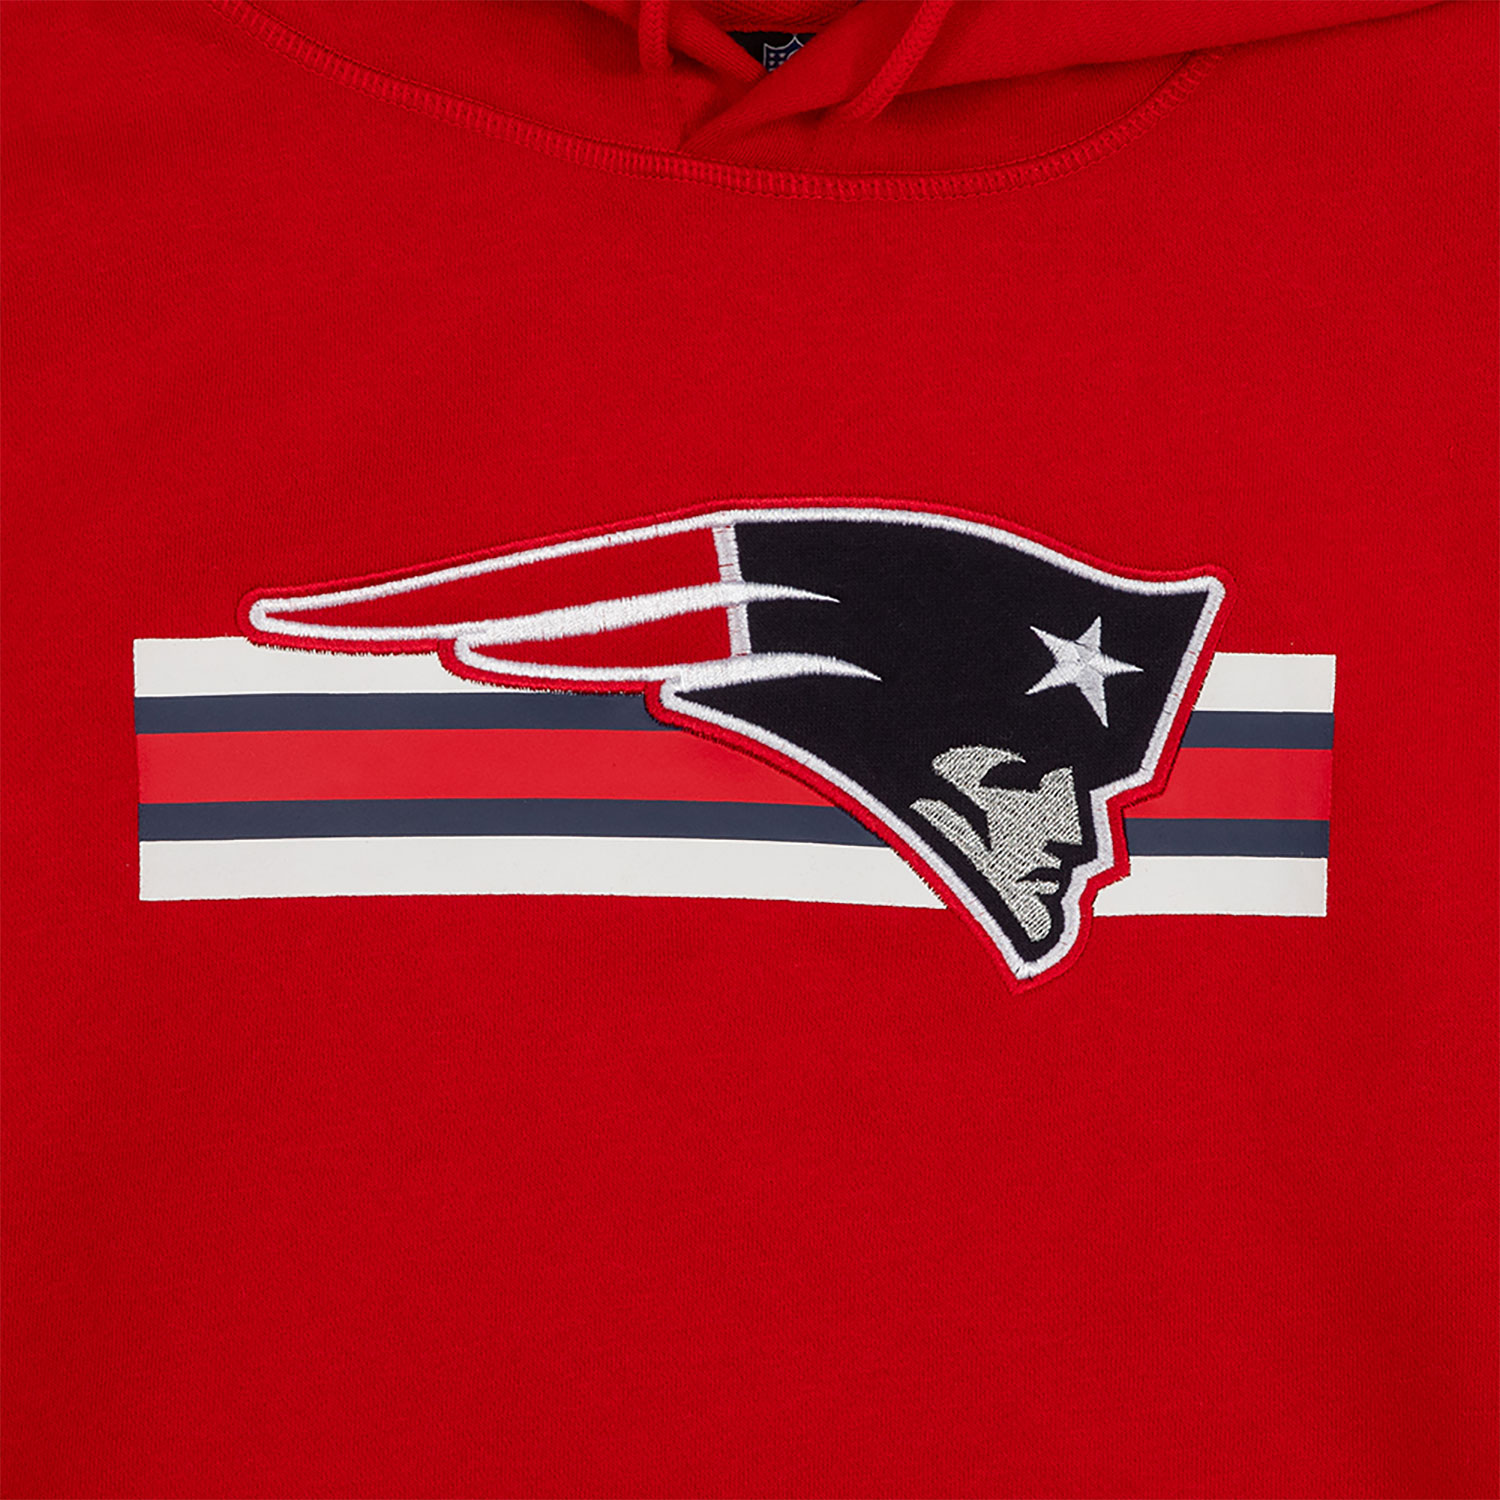 New England Patriots NFL Sideline 2023 Third Down Red Oversized Pullover Hoodie